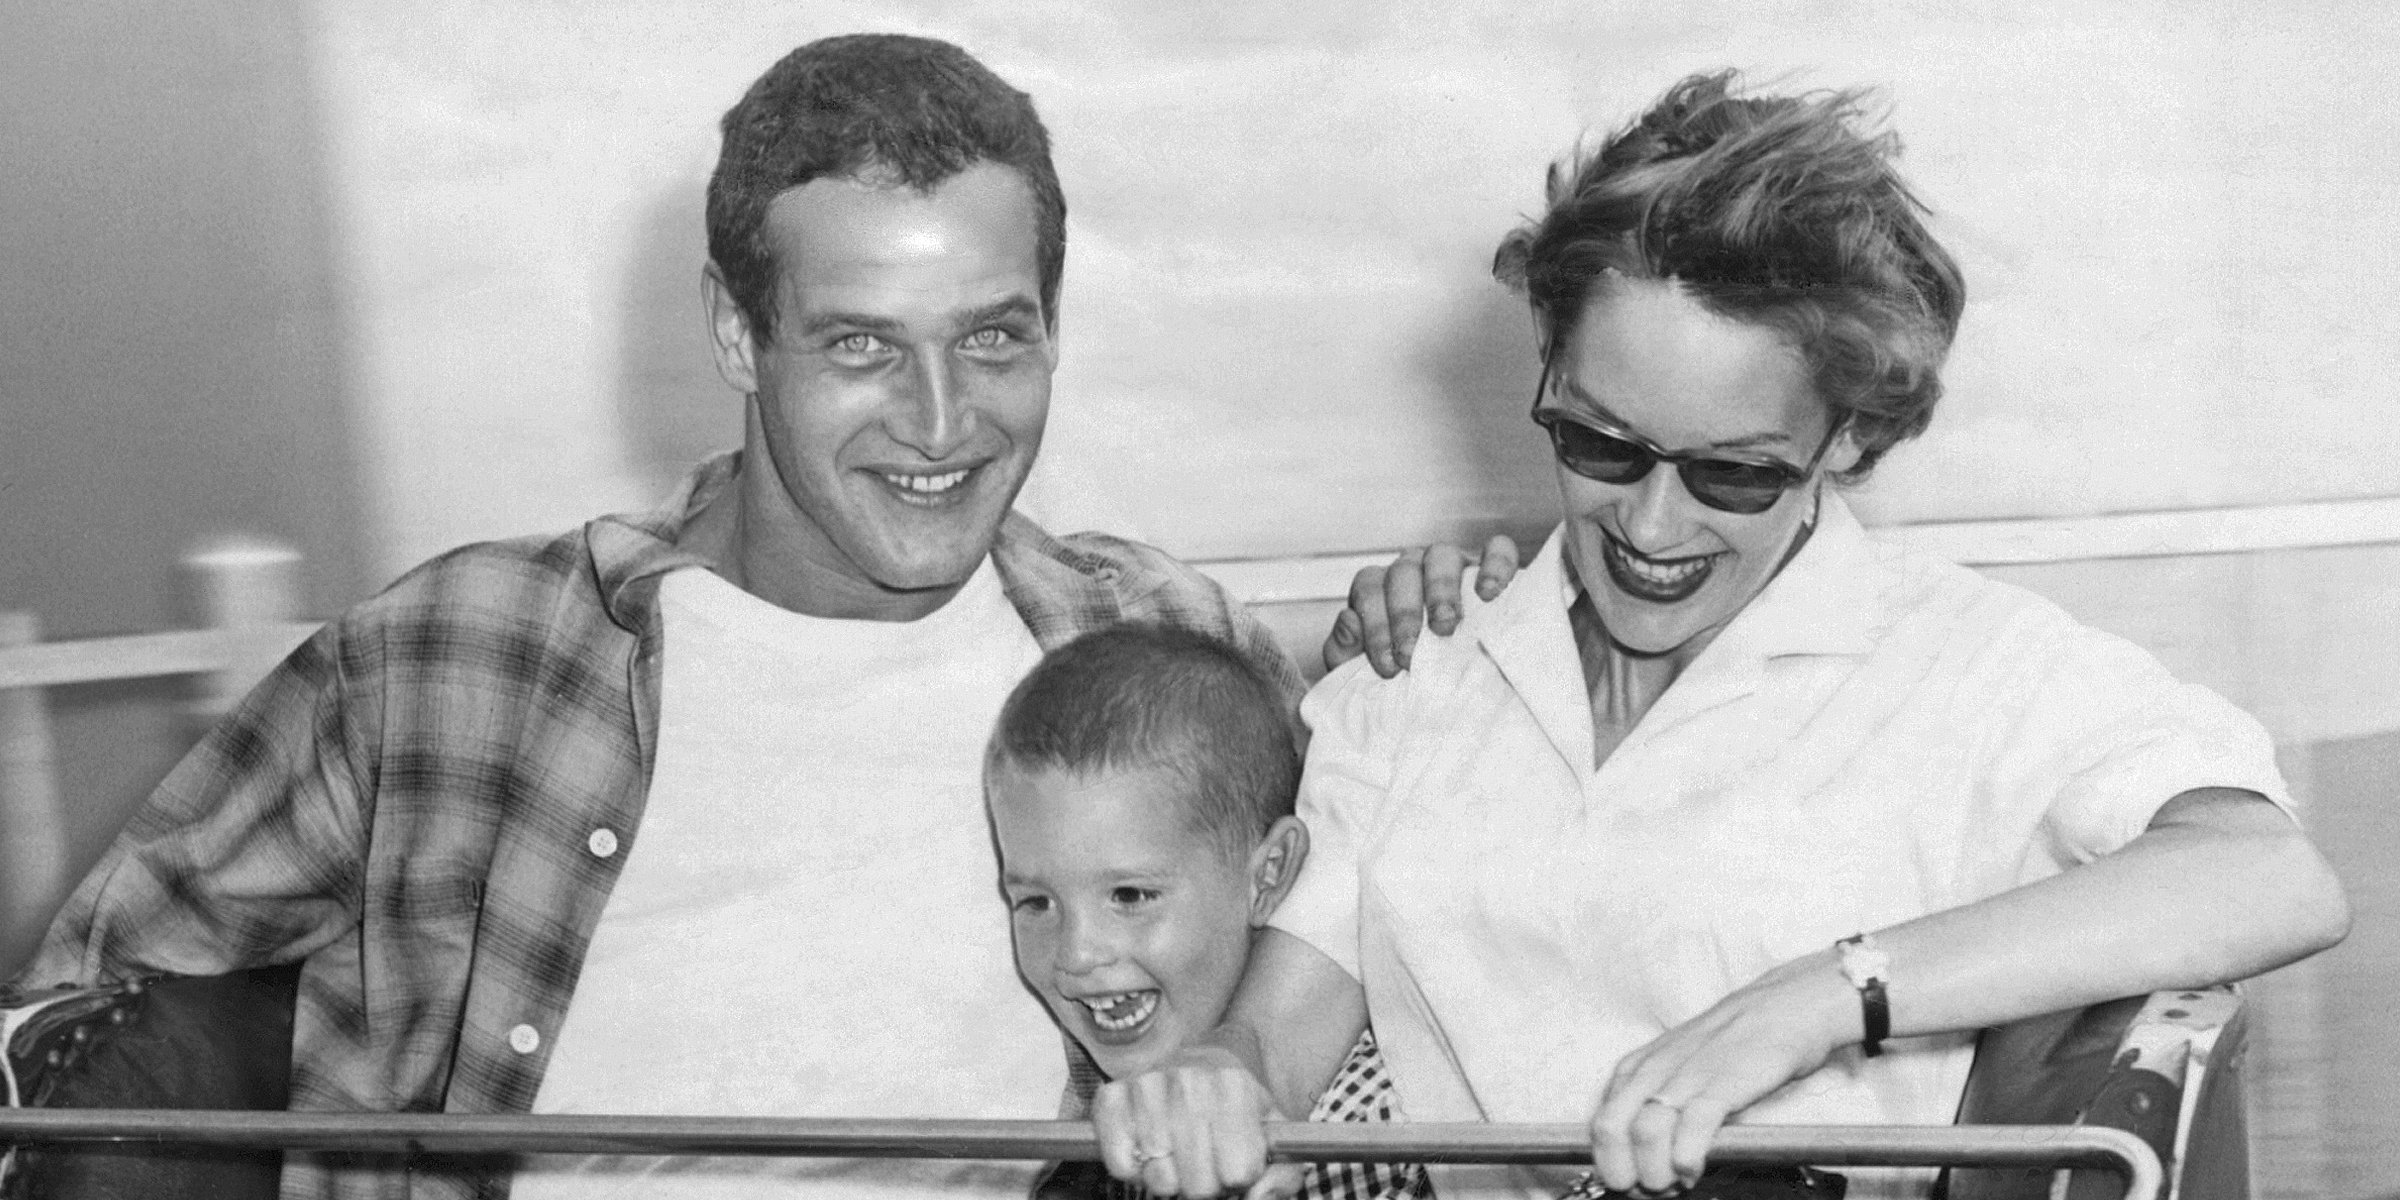 Jackie Witte, Paul Newman, and Scott Newman | Source: Getty Images